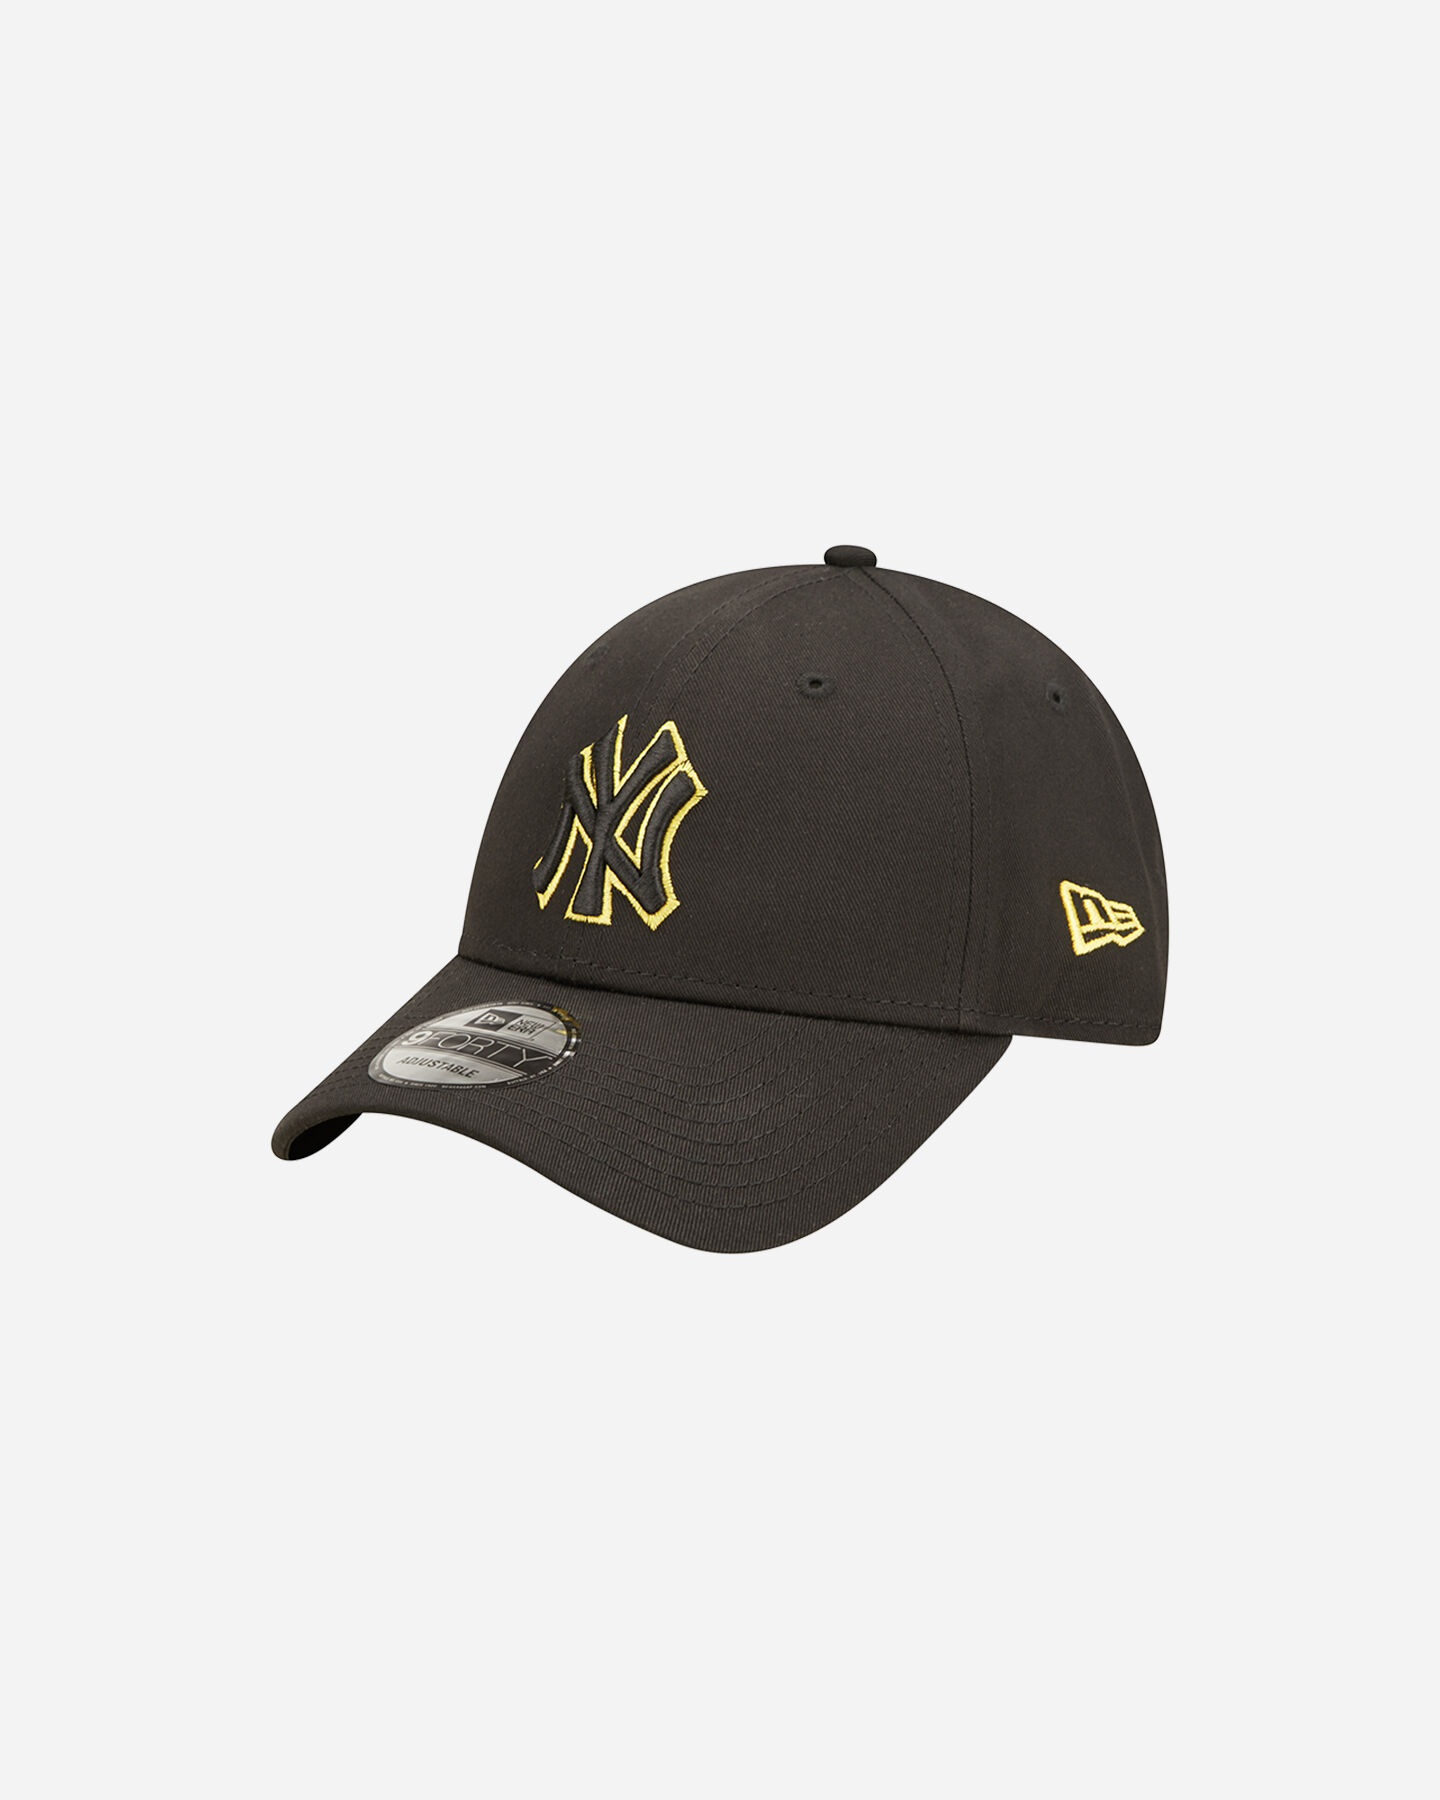  Cappellino NEW ERA 9FORTY TEAM OUTLINE NY YANKEES  S5546167|001|OSFM scatto 0